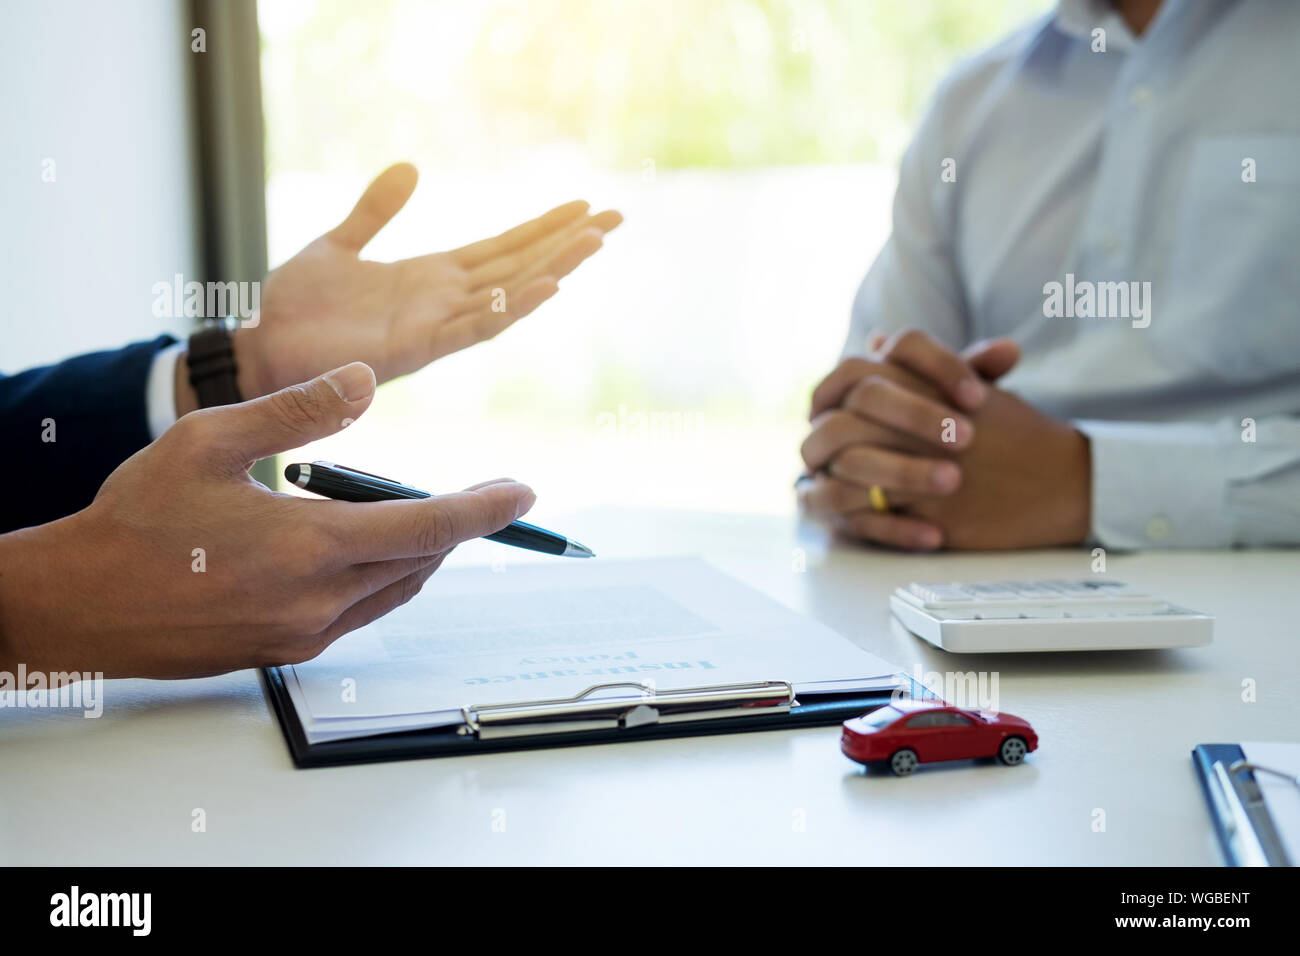 Cropped Image Of Car Salesperson Gesturing While Communicating With Customer At Desk Stock Photo